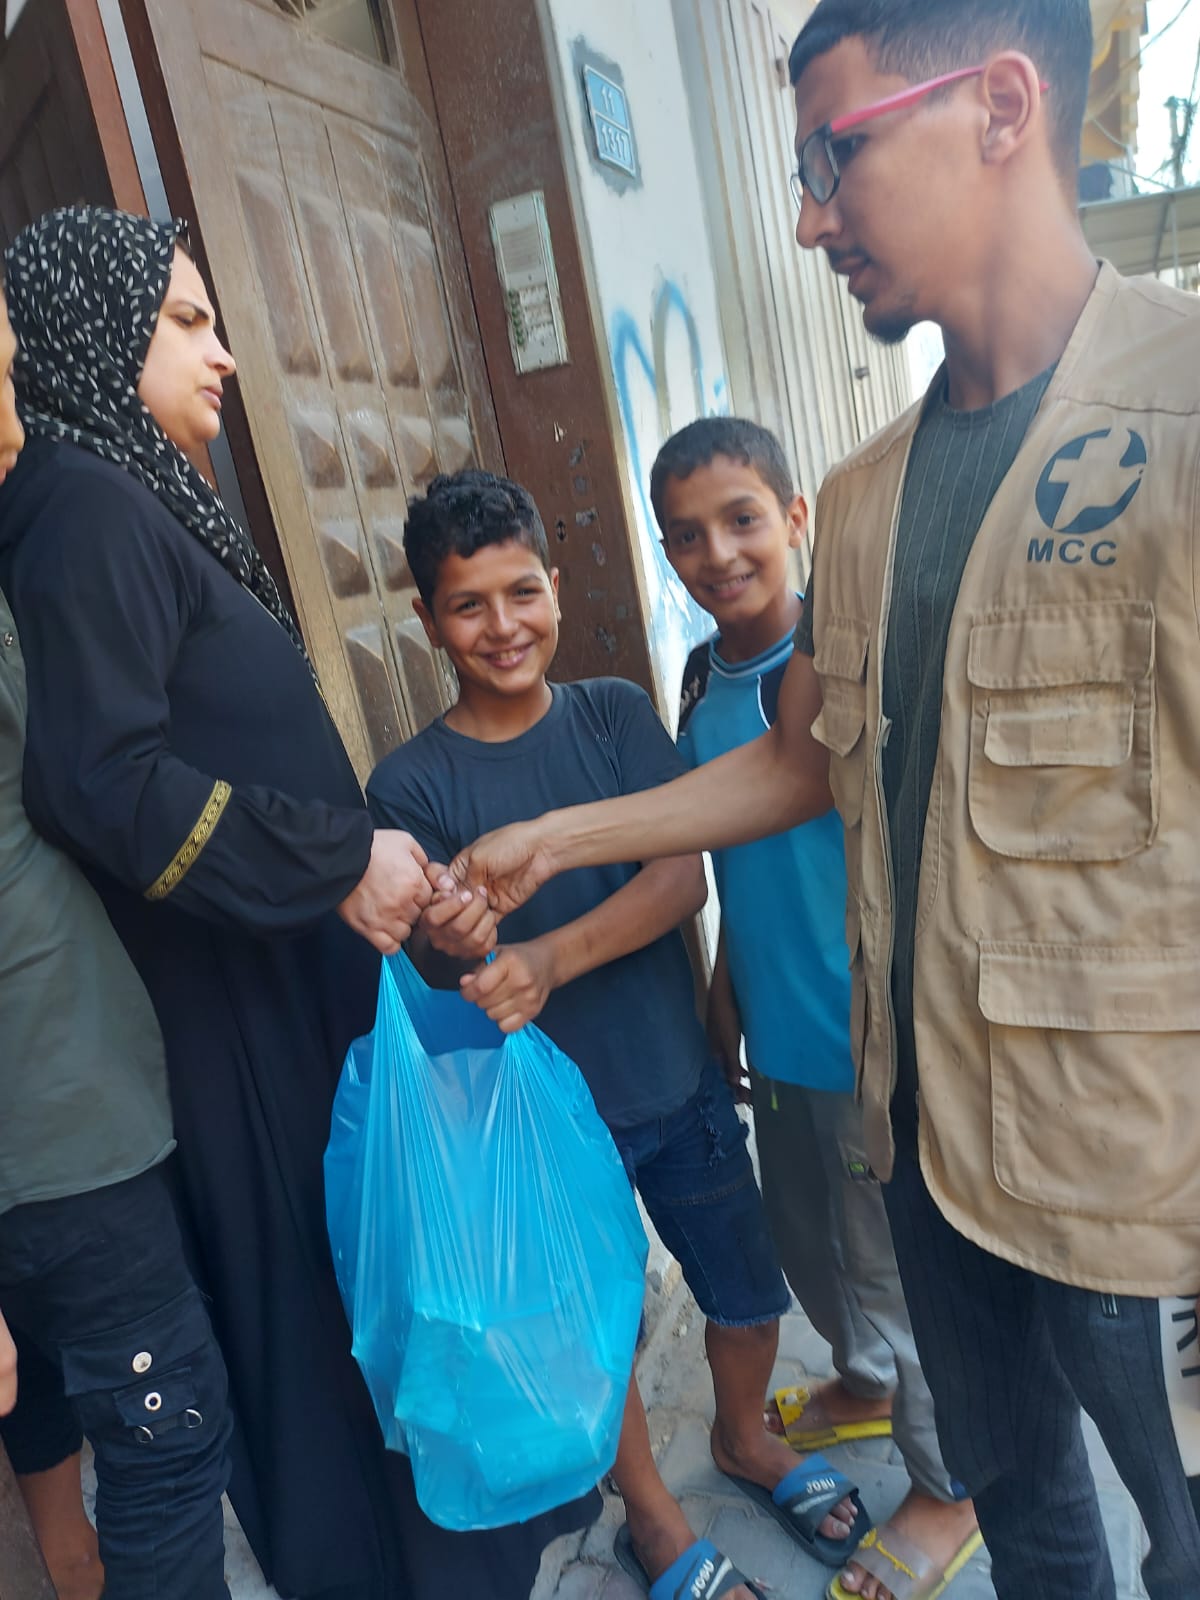 A man handing relief supplies to a woman and two boys